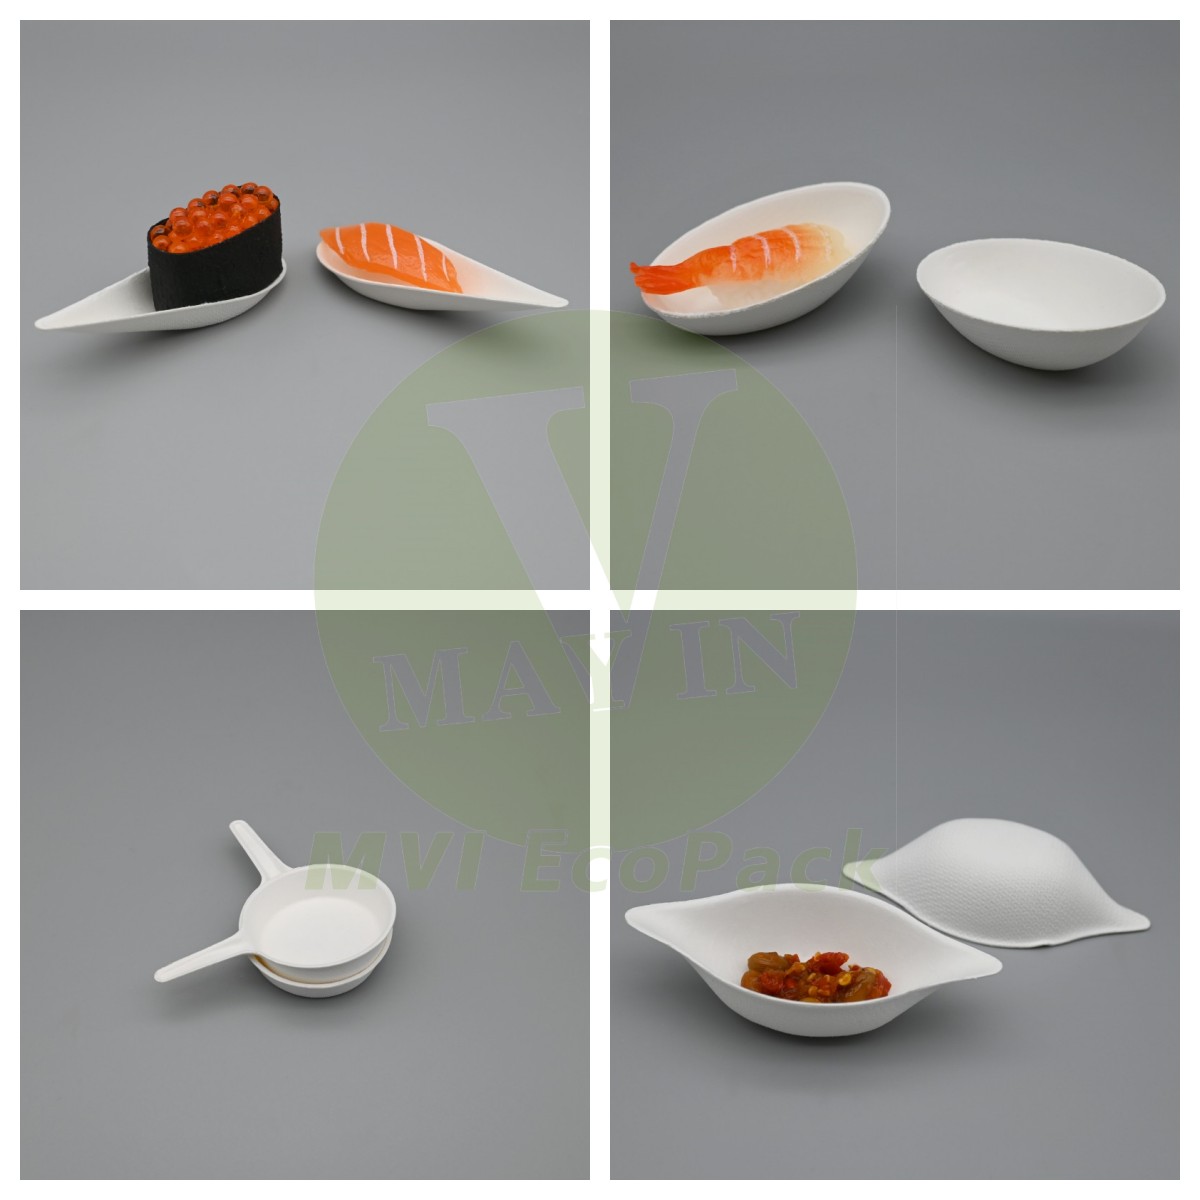 NEW Arrival bagasse sugarcane pulp cutlery from MVIECOPACK